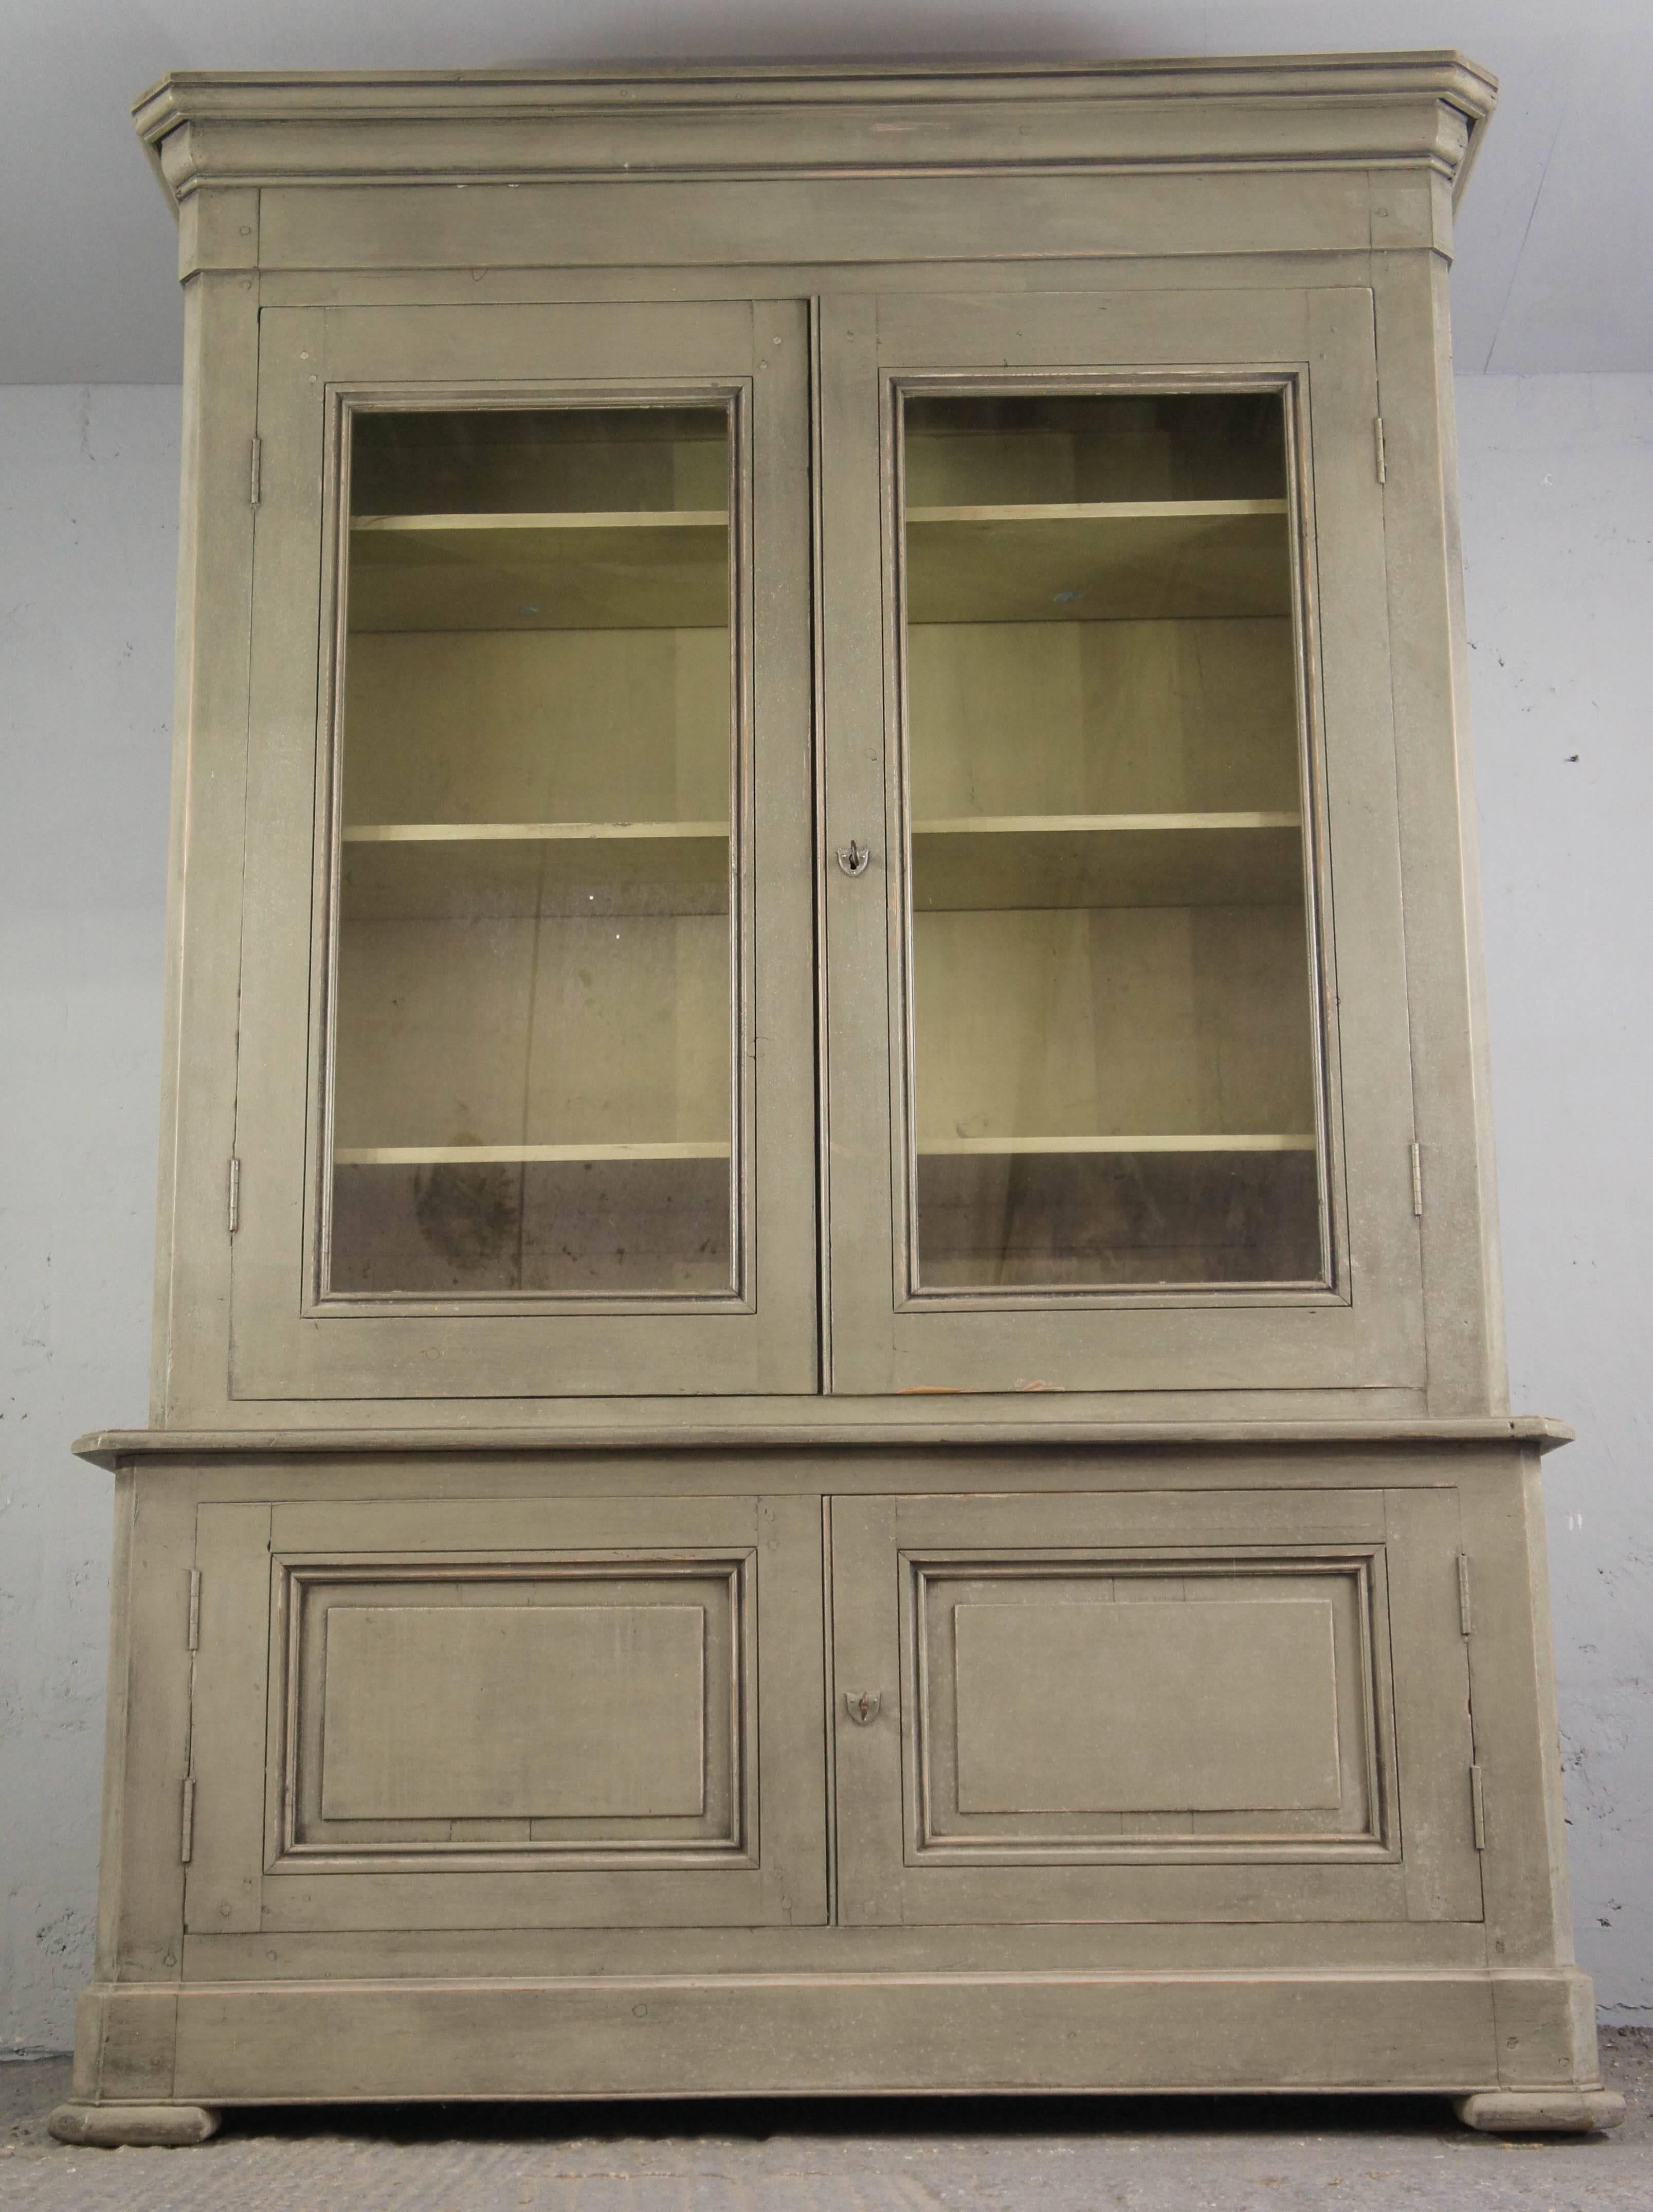 Fabulous 19th century bookcase sourced in the southern region of France. It has been later painted in a sage green paint and a contrasting cream colour inside. The cupboard below features double doors with lock and key and shelf inside. The top